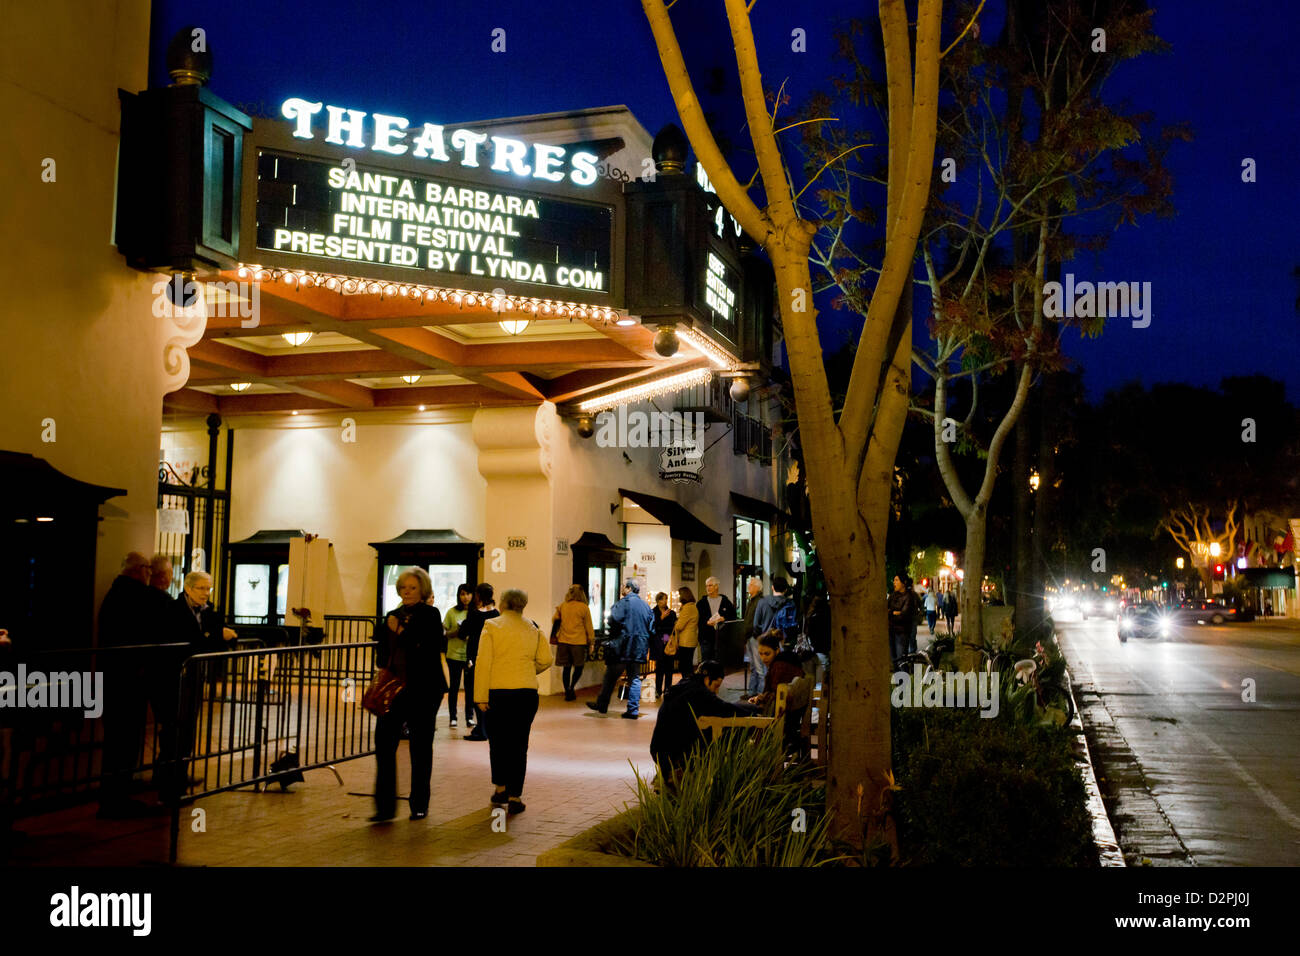 The Metro 4 Theater in downtown Santa Barbara is one of the Santa Barbara International Film Festival's numerous venues, offering screenings beginning early in the morning and ending late in the evening over the course of 11 days. (Photo by Scott London) Stock Photo